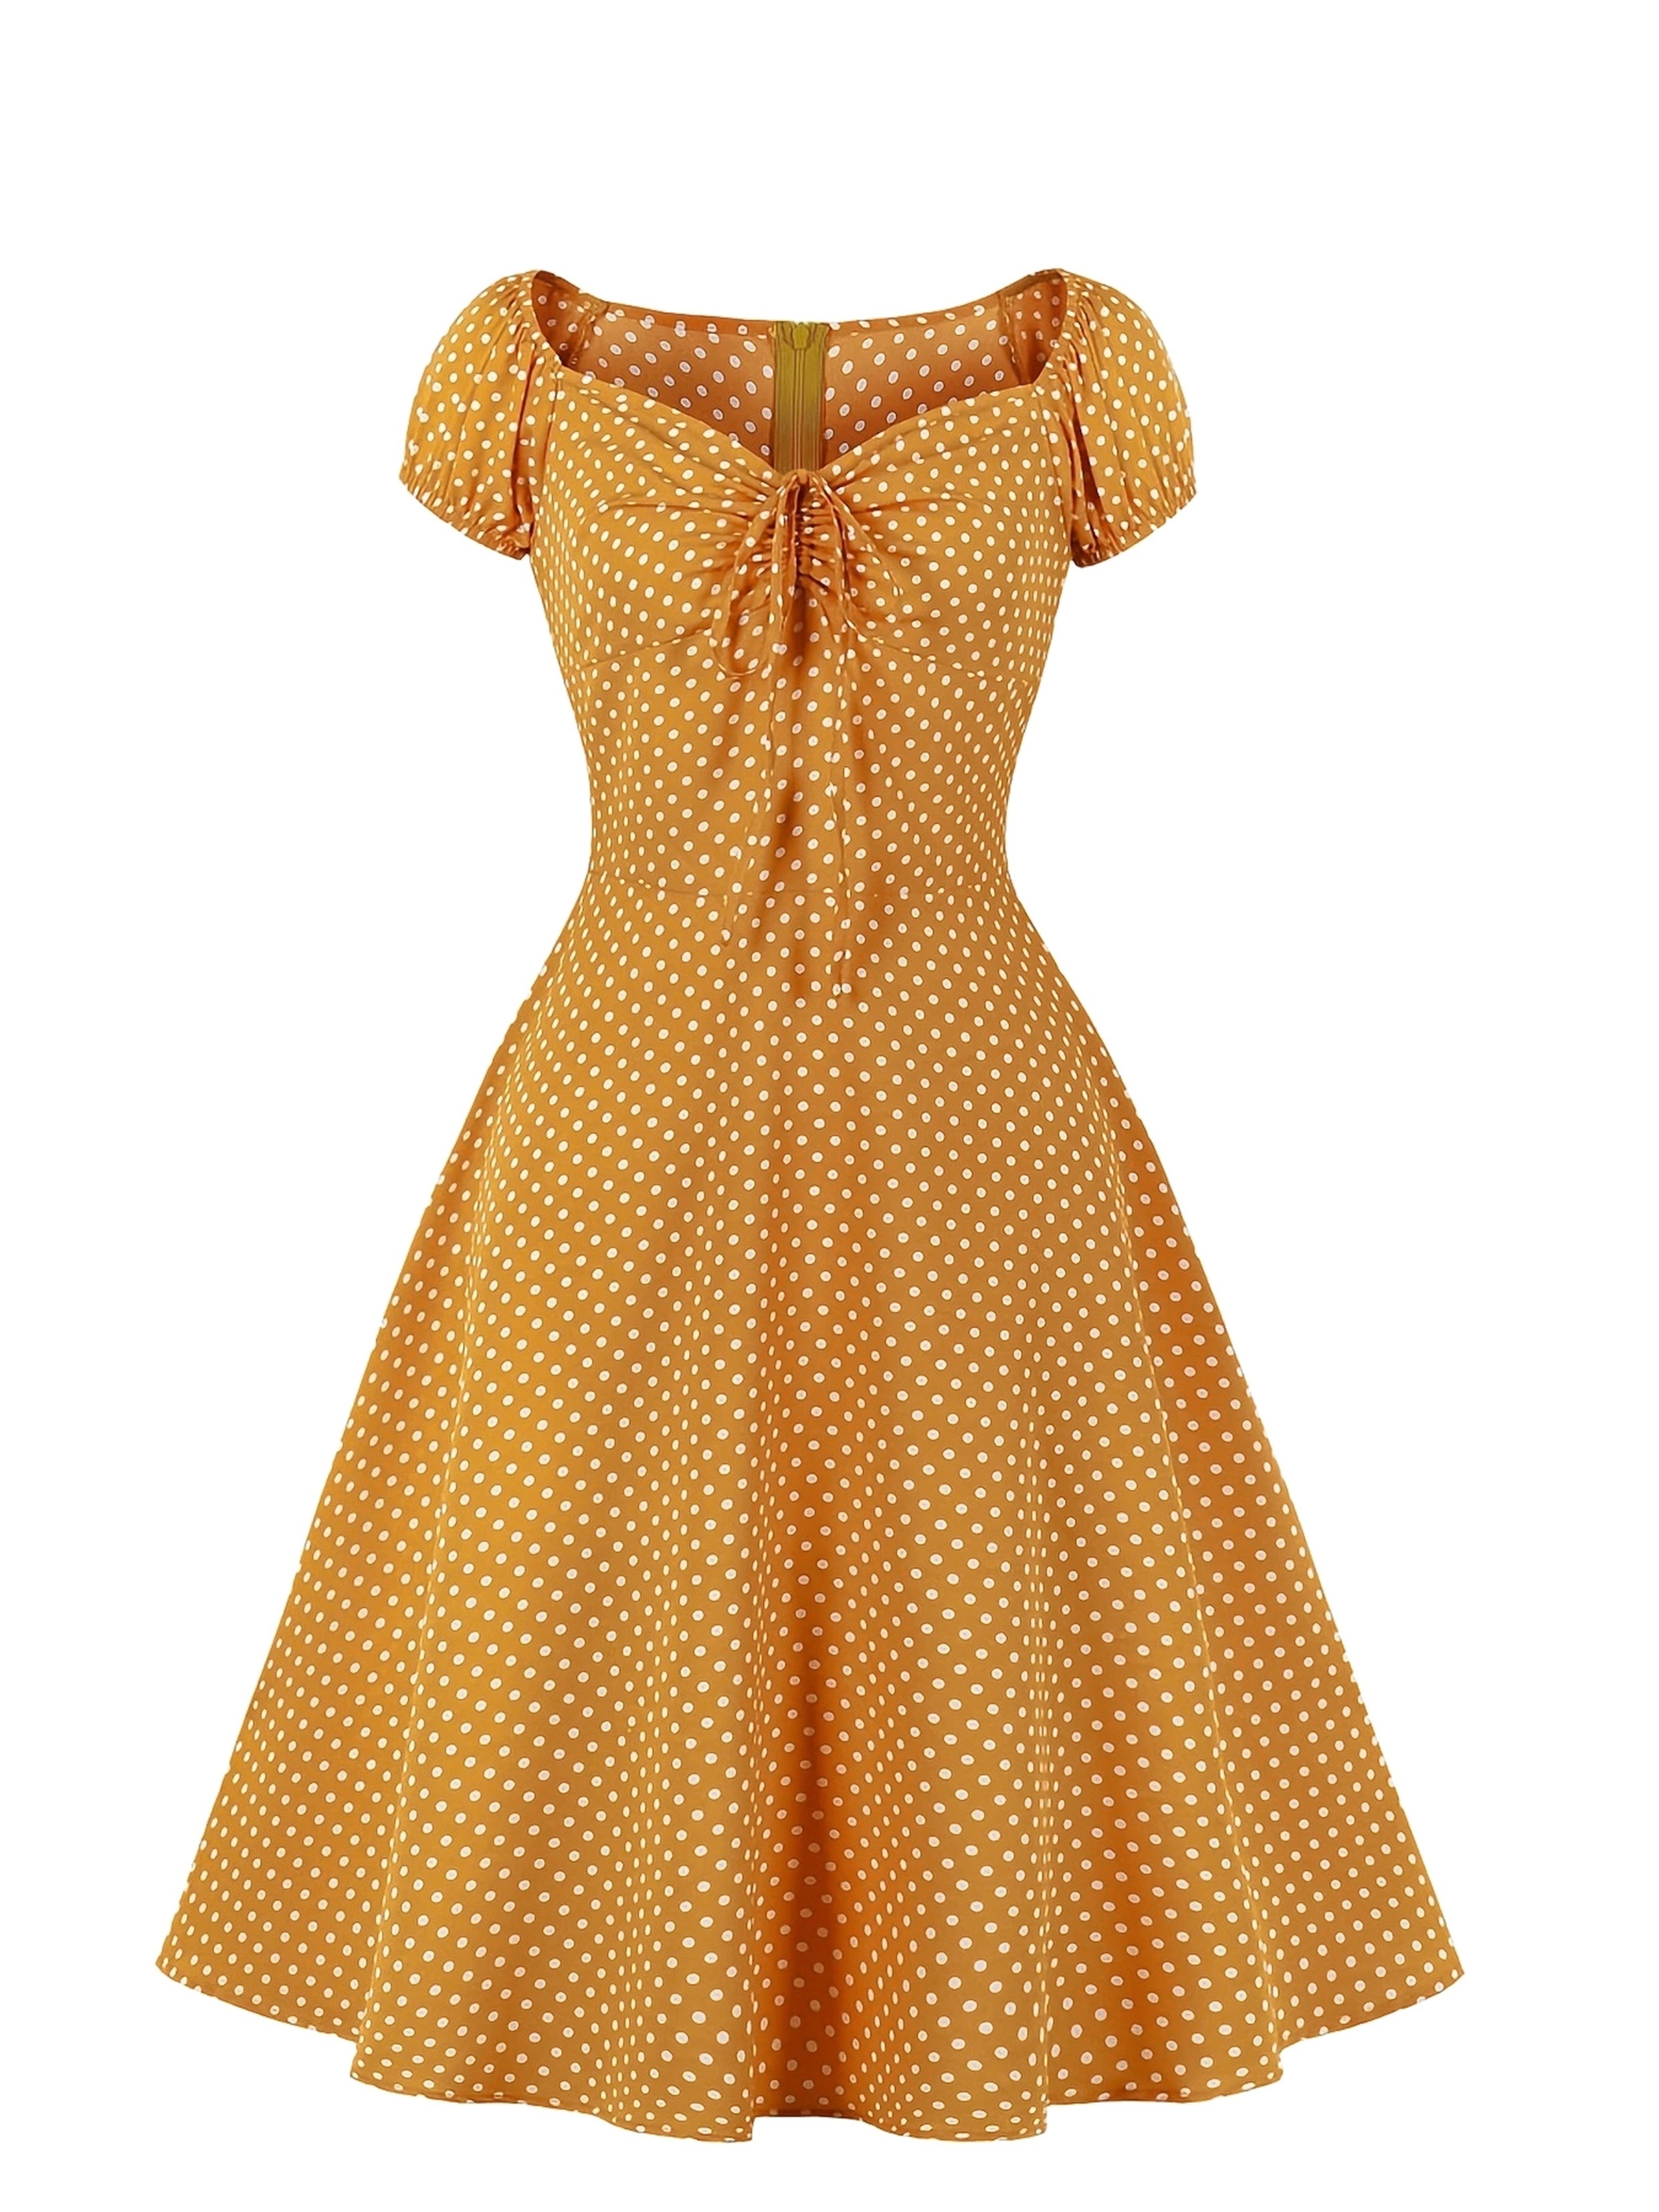  Women's 1950s Dresses Color Block A-Line Swing Dress Short  Sleeve Crewneck 50s Retro Dress Pinup Homecoming Gown Orange : Clothing,  Shoes & Jewelry